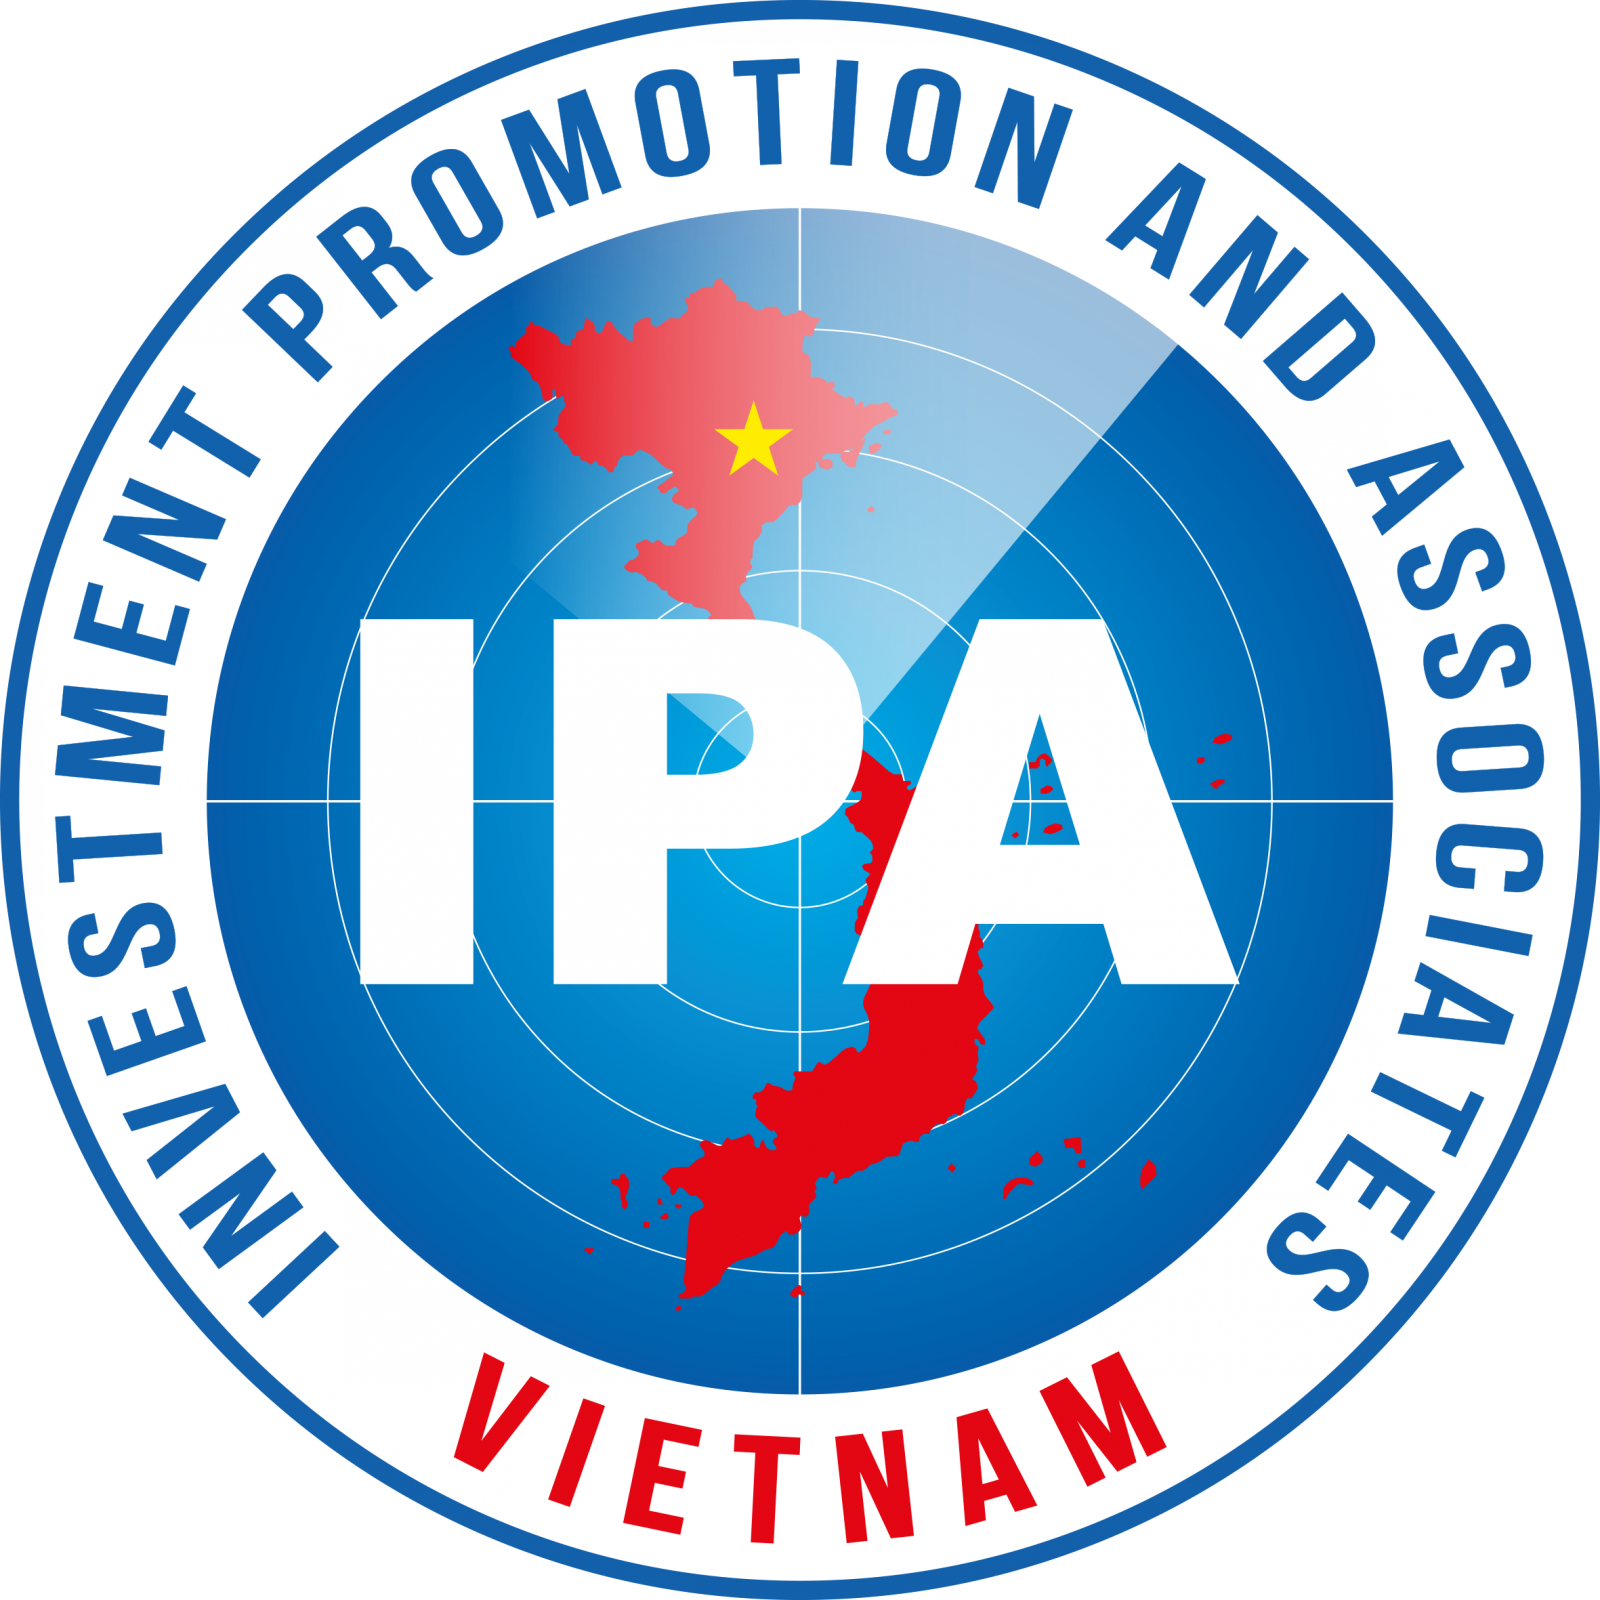 VIETNAM TRADE AND INVESTMENT PROMOTION PORTAL